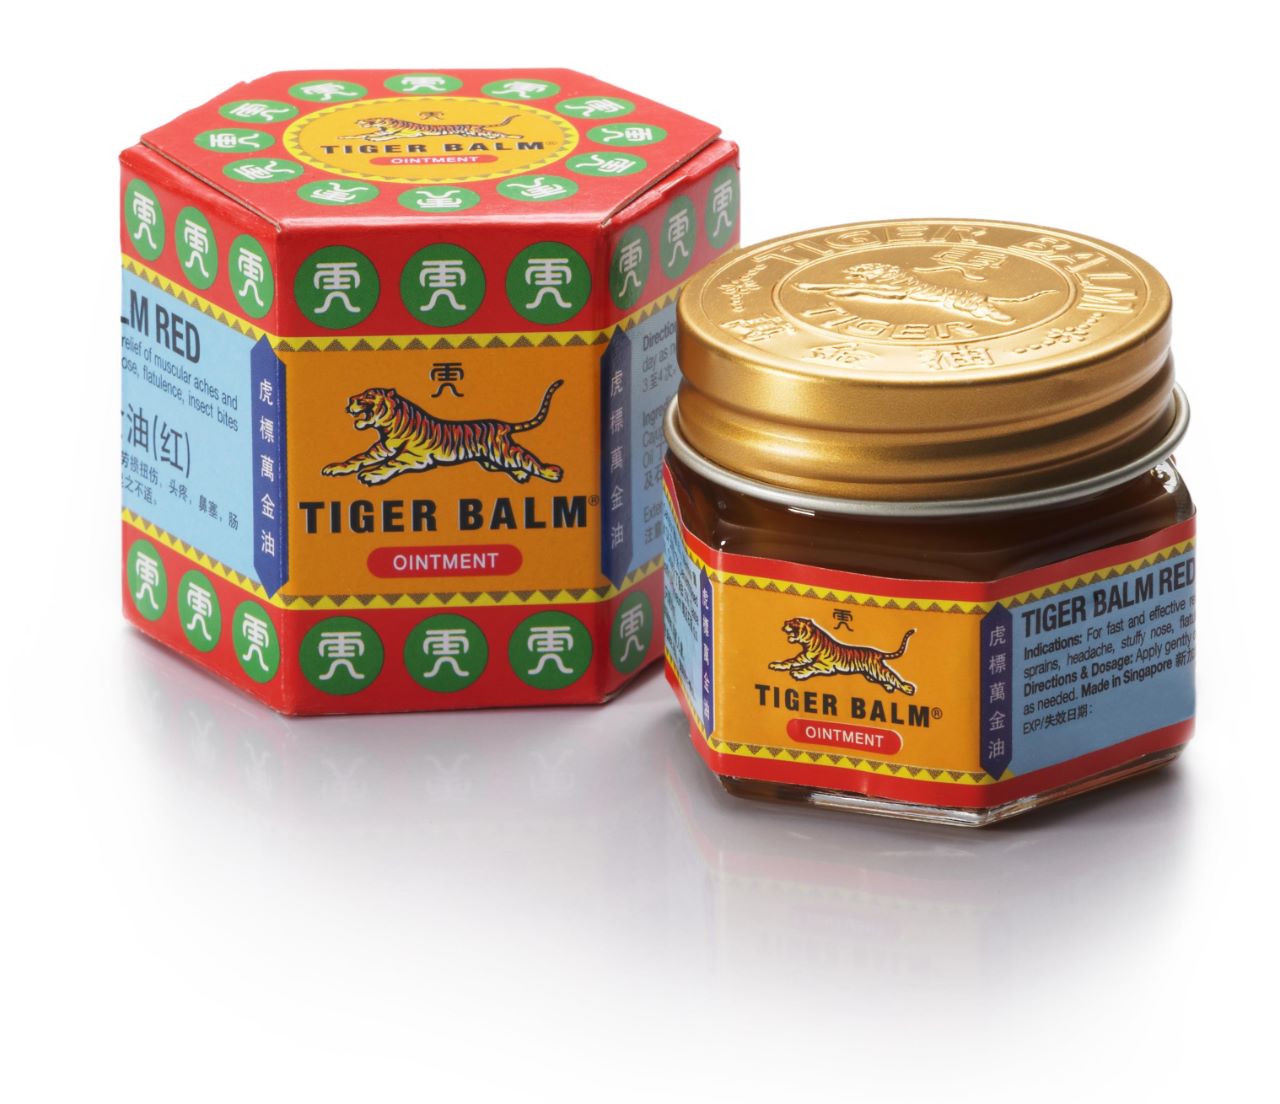 Tigerbalm Red Ointment 19g